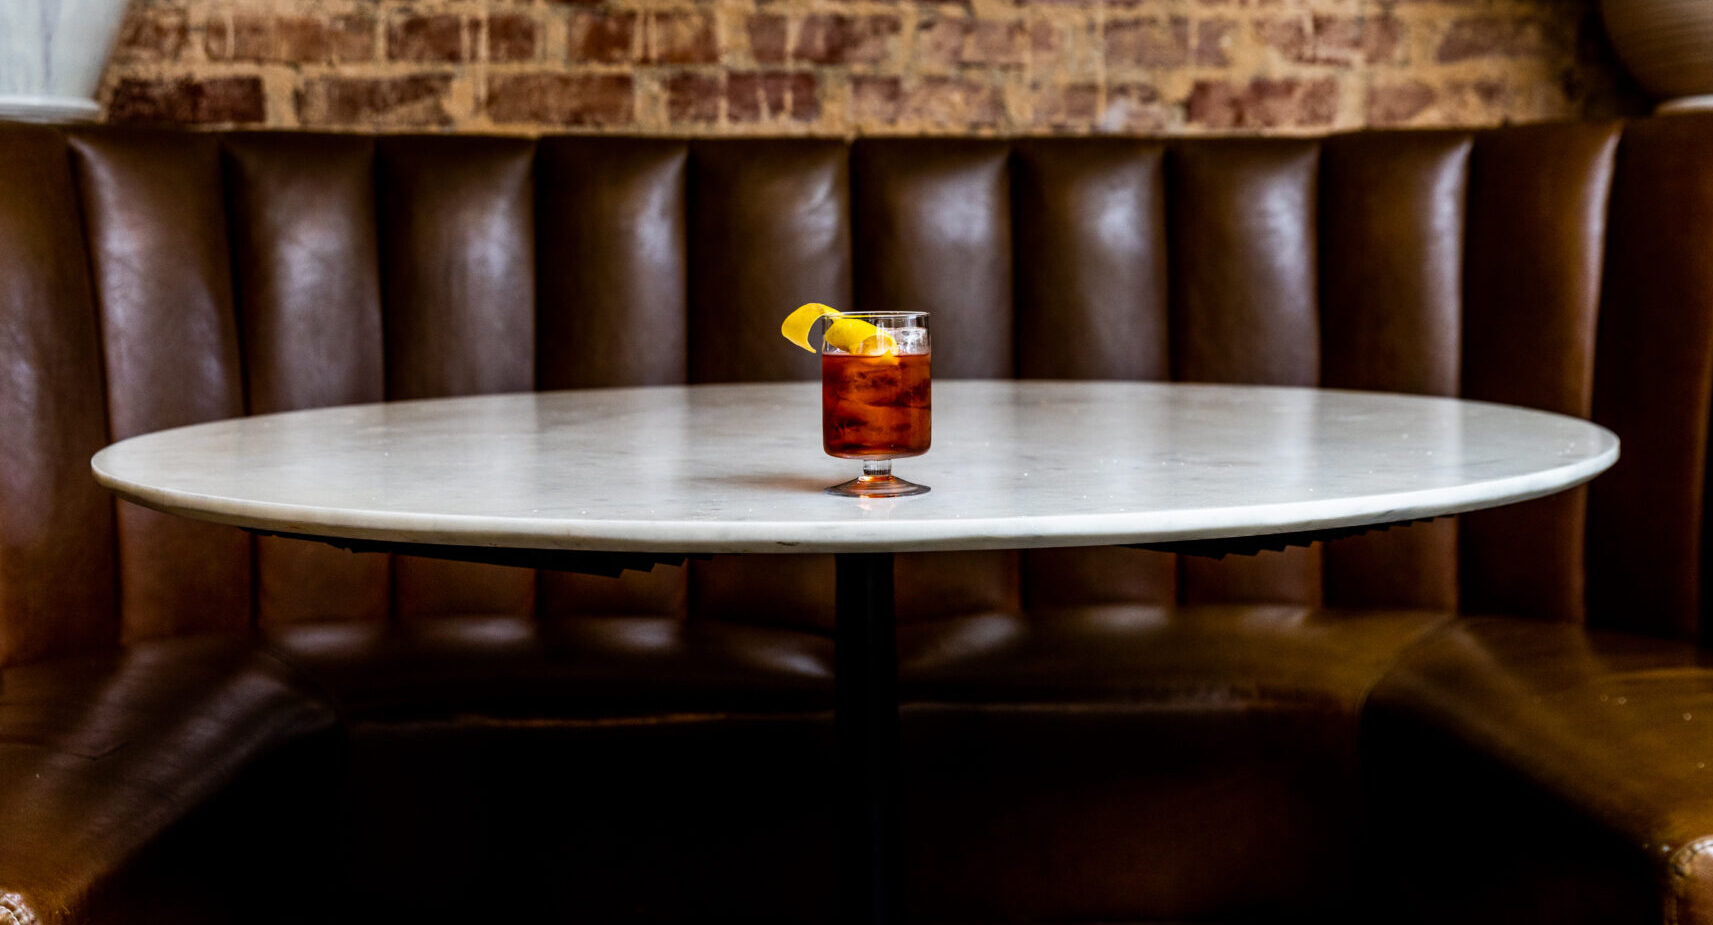 A spirited glass of ente tres negroni sits on top of a white table in front of a brown booth.